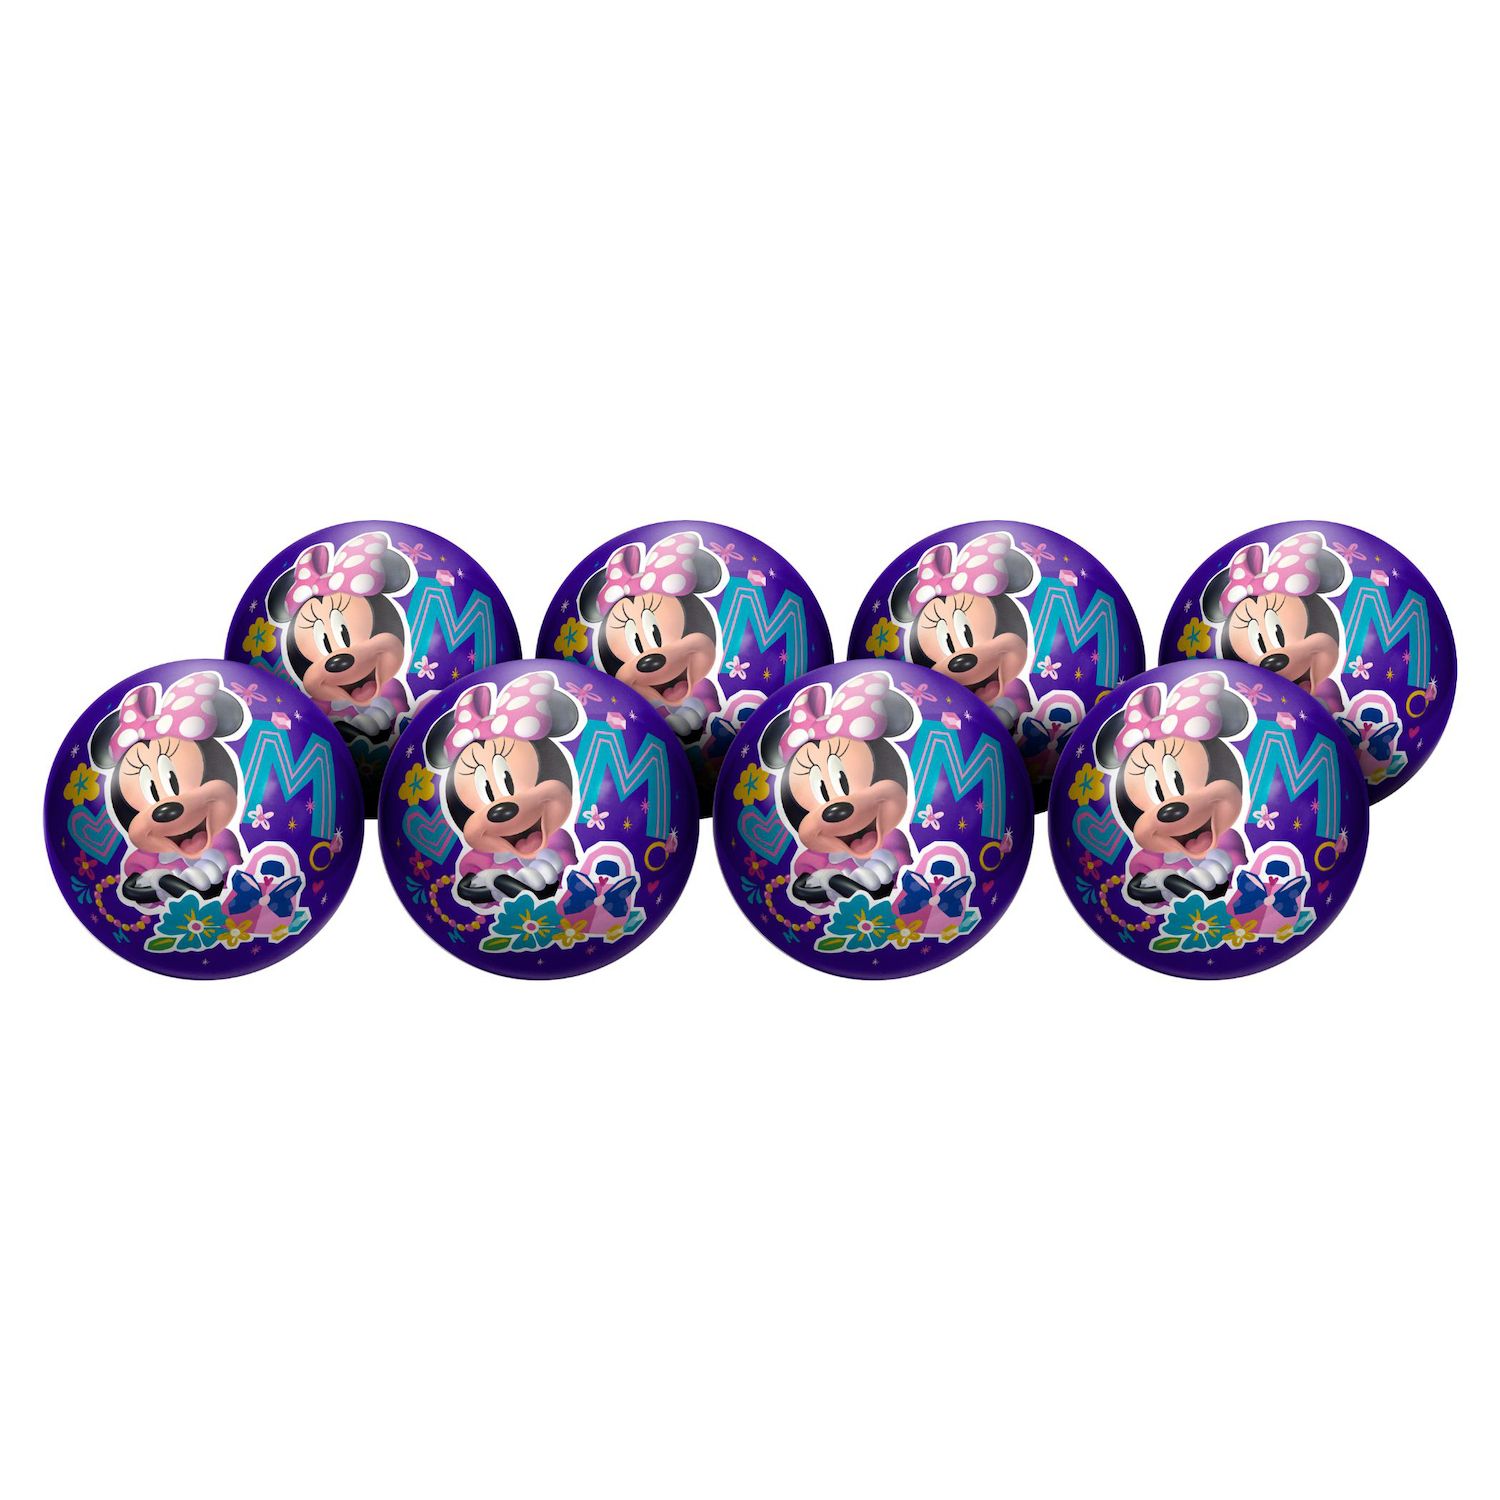 Image for Hedstrom Disney's Minnie Mouse 8-Pack Playball Party Pack at Kohl's.